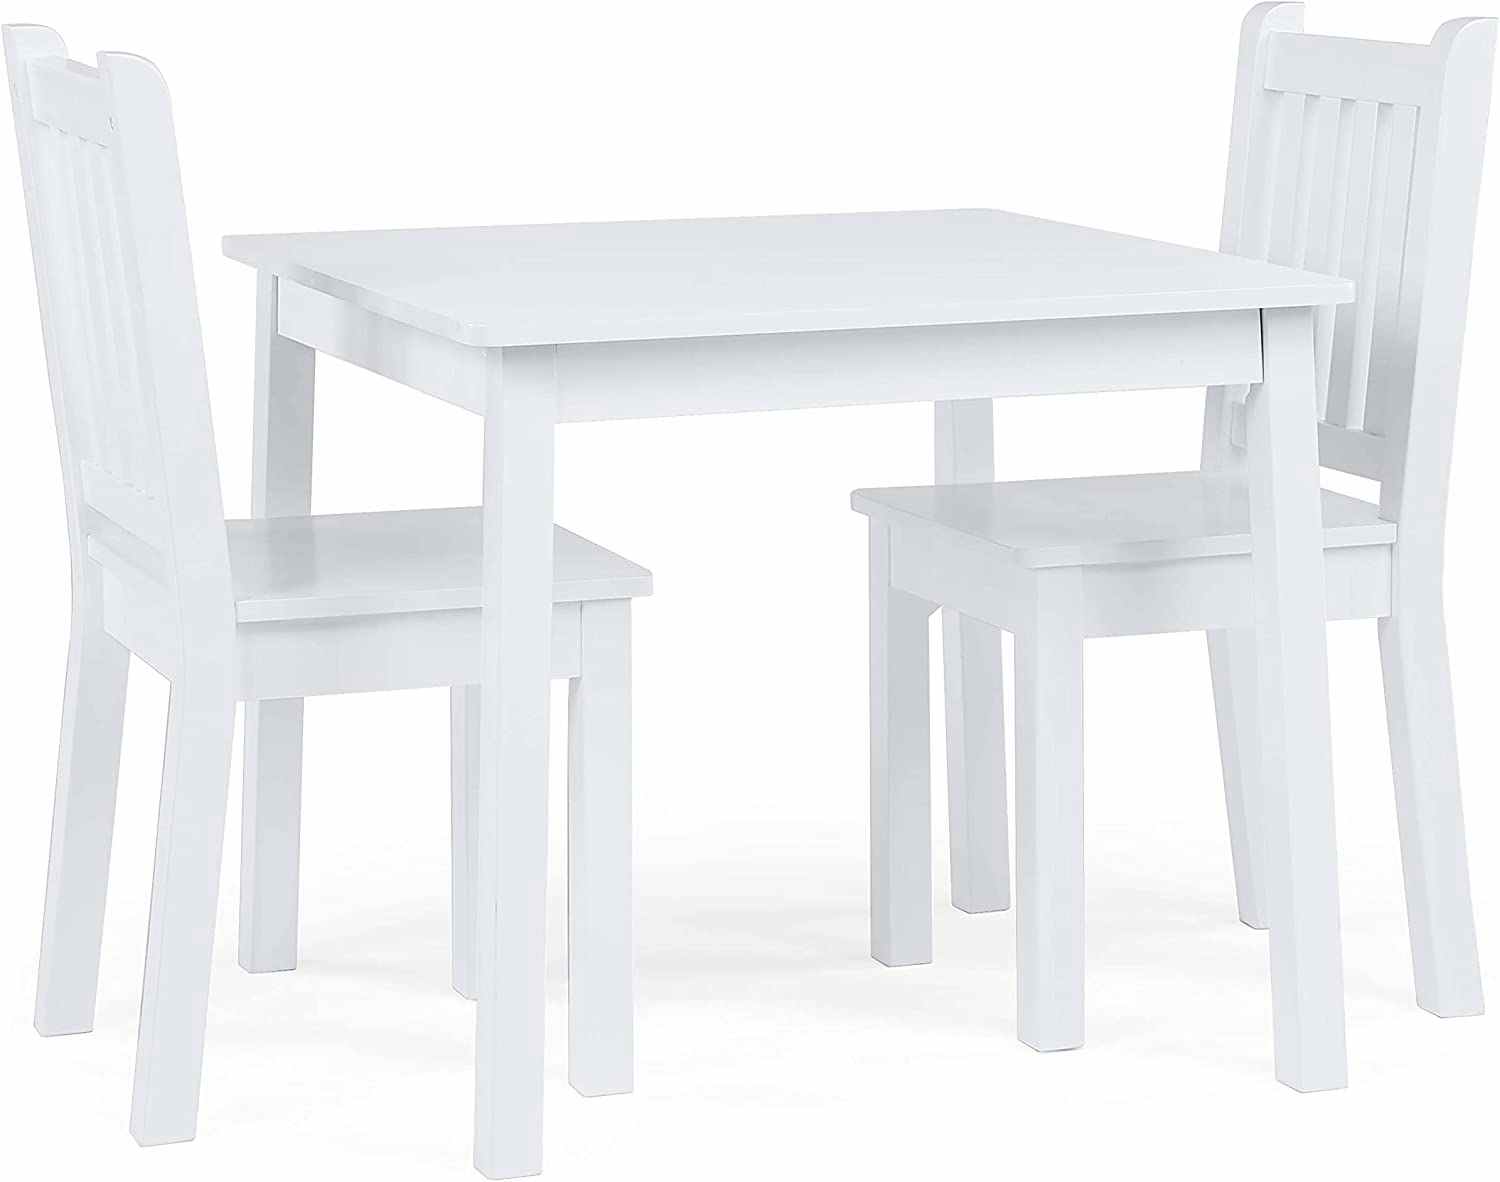 A white Humble Crew kids table and chairs set on a white background.